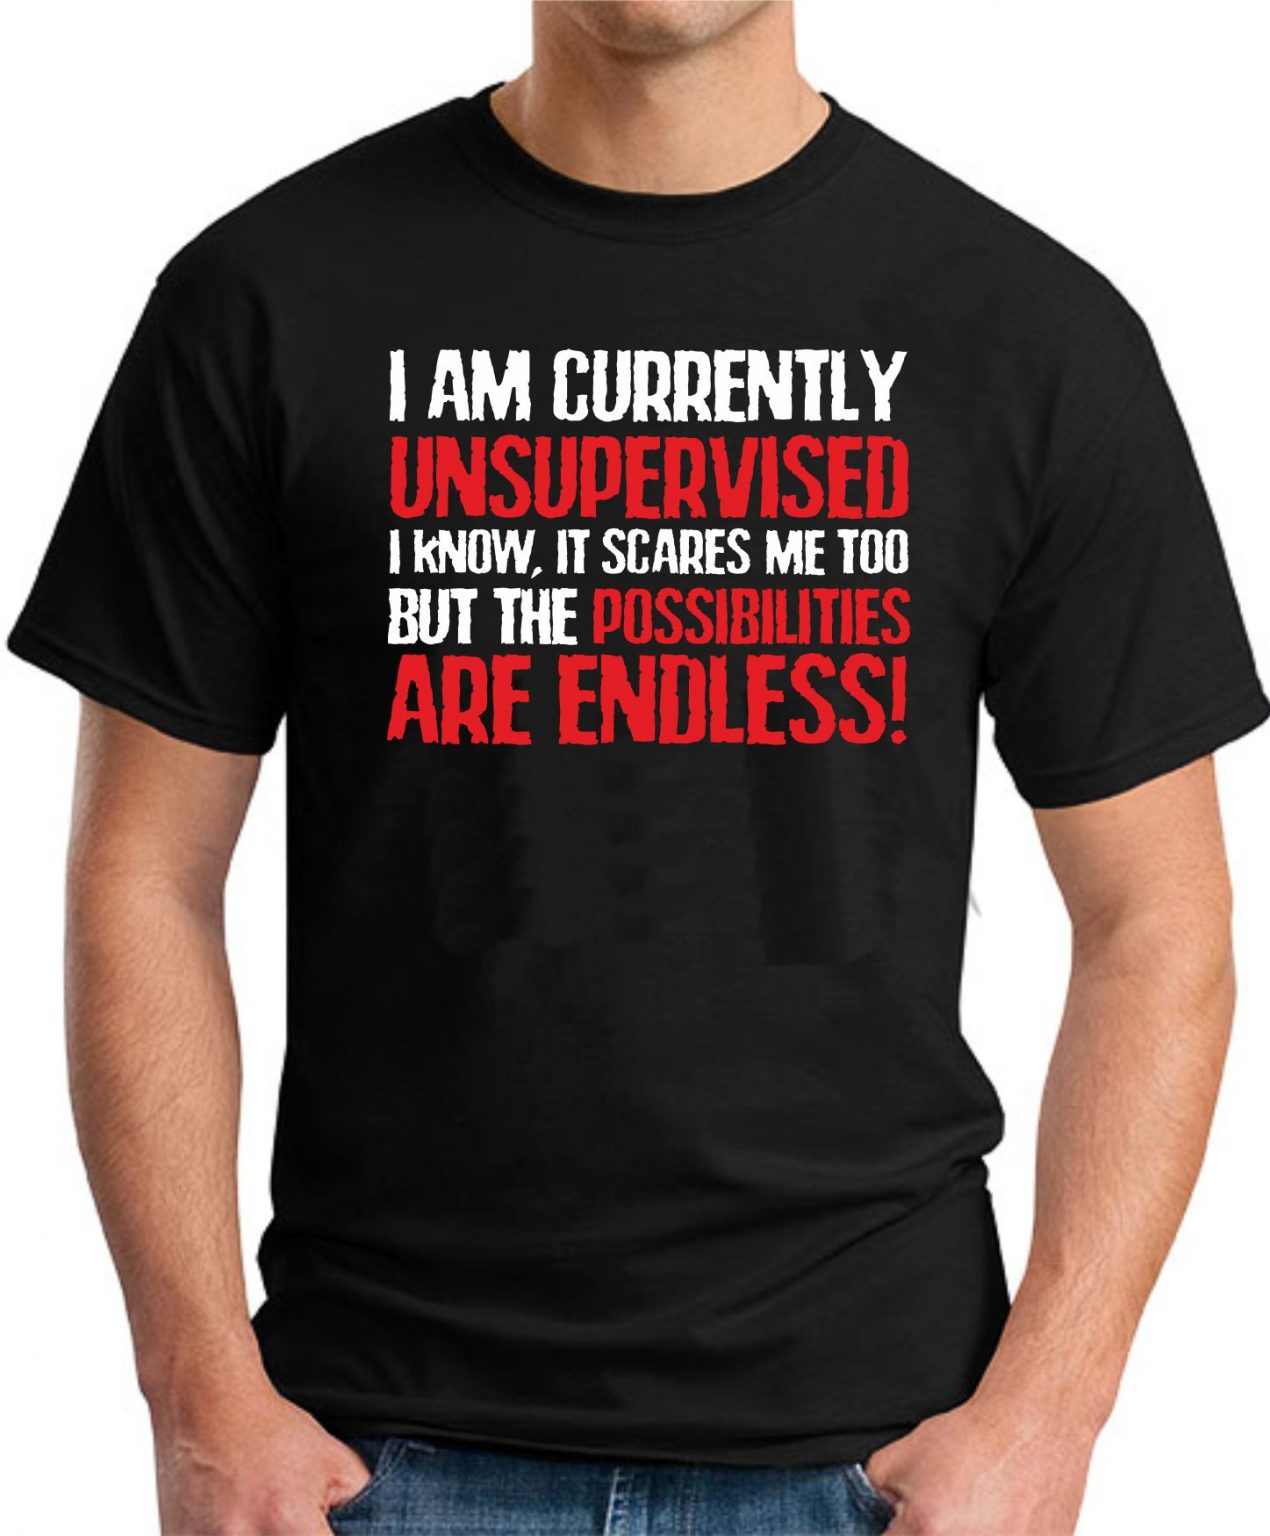 I AM CURRENTLY UNSUPERVISED T-SHIRT - GeekyTees